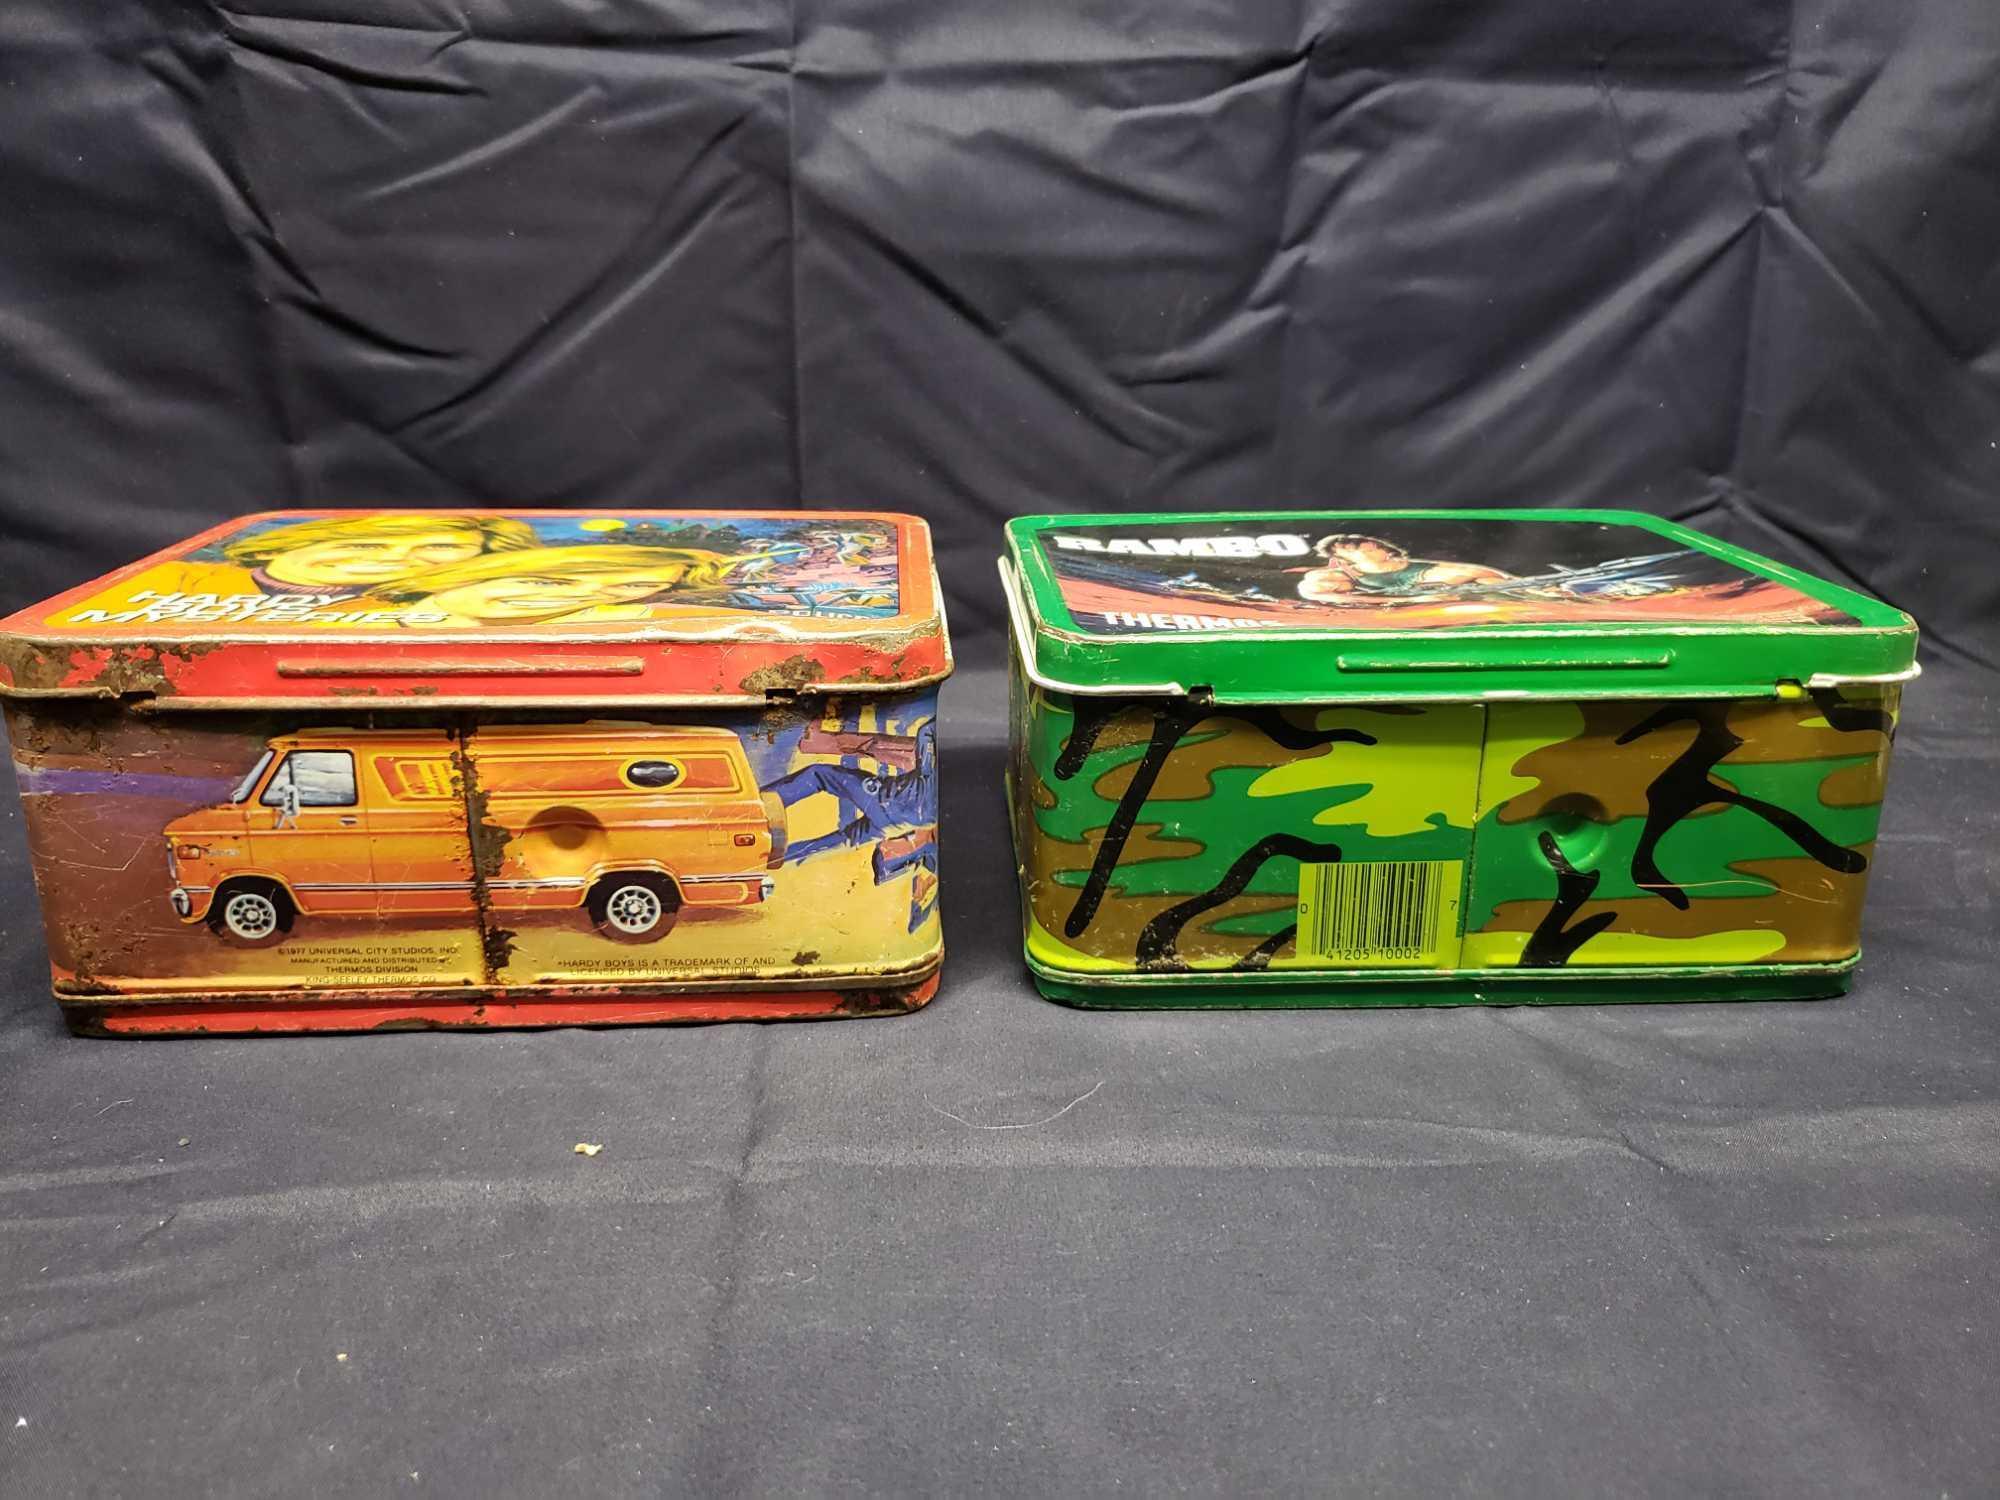 1985 Rambo Lunchbox. No Thermos. 1977 Hardy Boys Mysteries Lunchbox w Thermos.